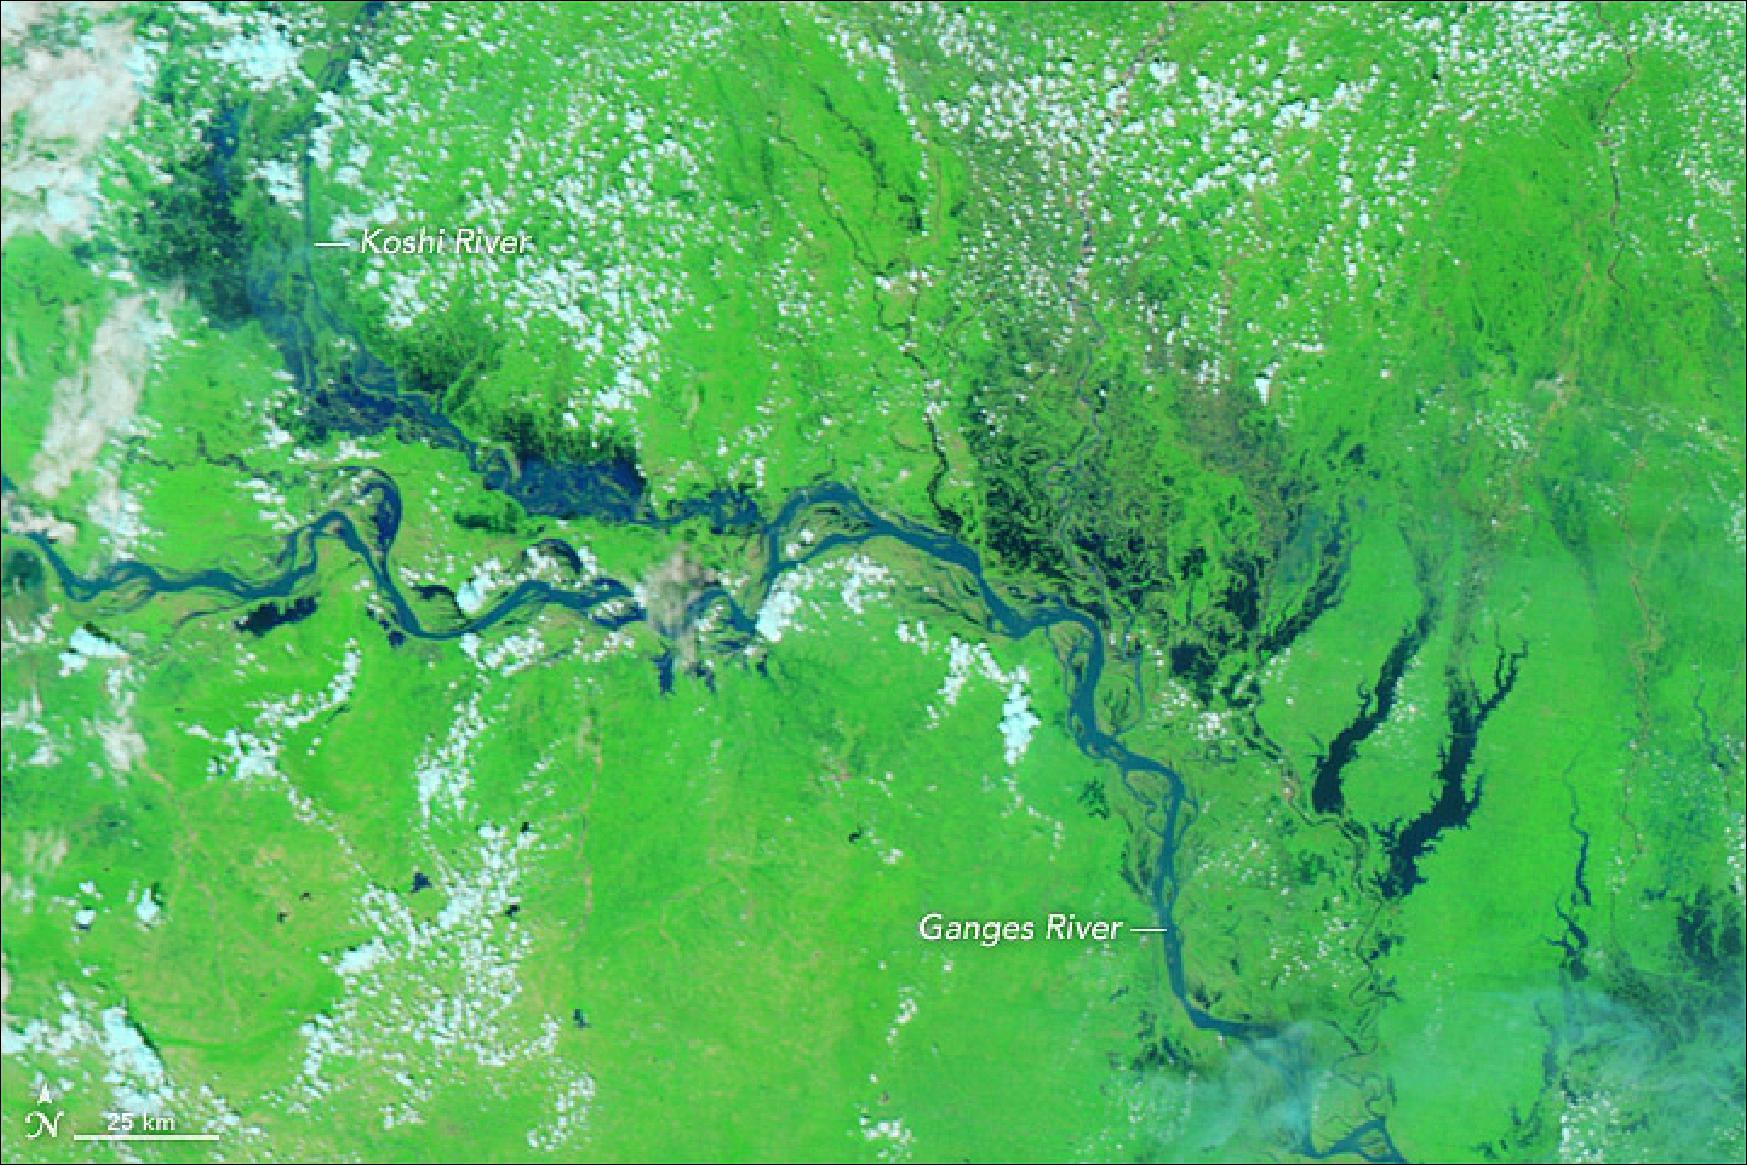 Figure 56: MODIS on the Terra satellite acquired this image of the Ganges, Koshi, and several other rivers on September 6, 2017, when flood water covered large swaths of the landscape (image credit: NASA Earth Observatory, images by Jesse Allen, using data from LAADS (Level 1 and Atmospheres Active Distribution System), story by Adam Voiland)